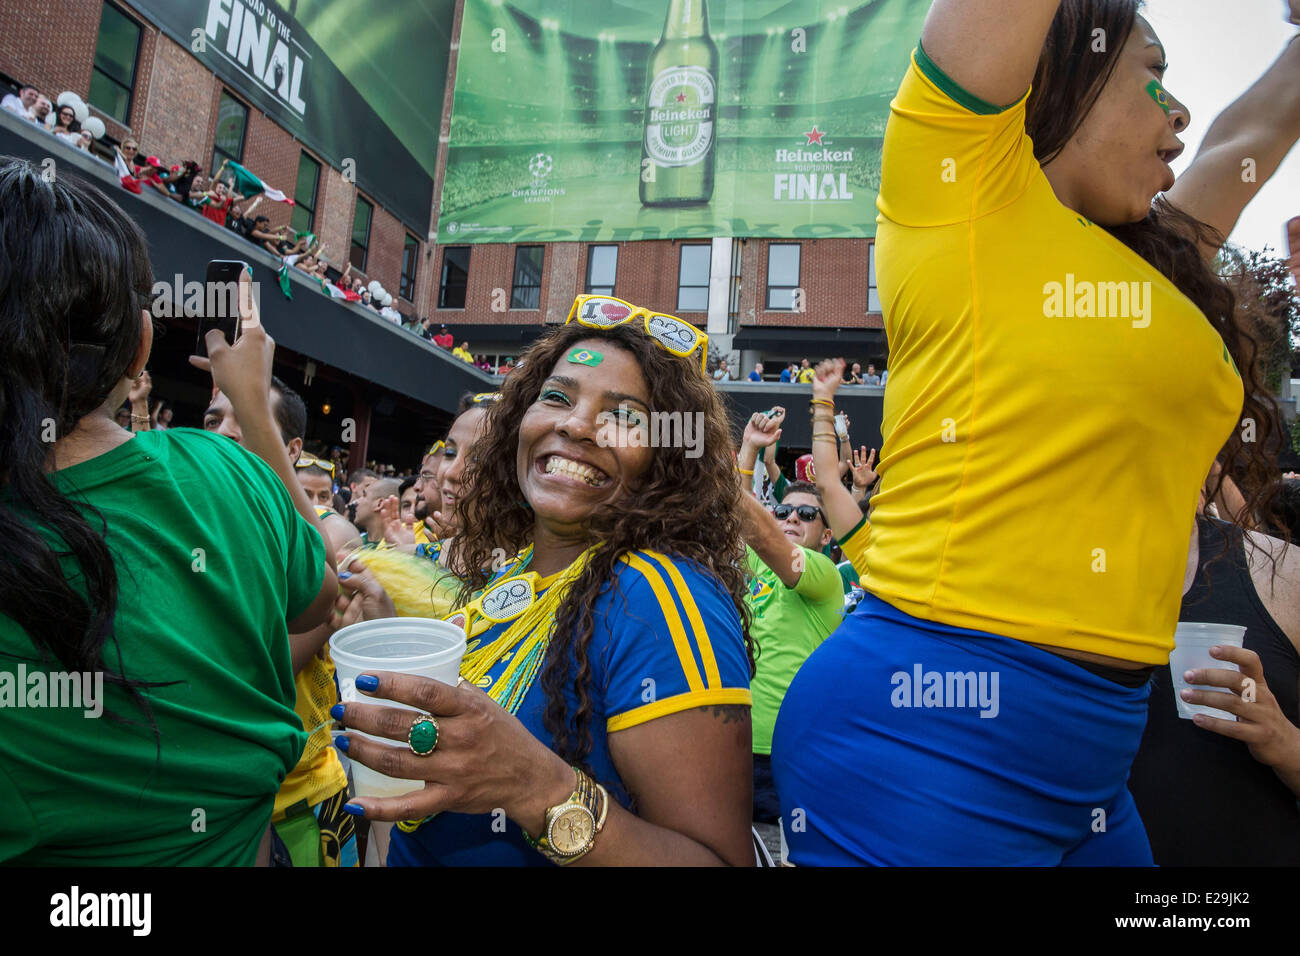 New York, NY, US. 17th June, 2014. Brazil and Mexico soccer fans gathered in New York City to support their national teams in what was one of the most exciting games without goals in world cup history. Both Brazilian fans and Mexican fans were both beyond passionate in supporting their teams and watched the game together in close proximity with good humor and respect for each other. Credit:  Scott Houston/Alamy Live News Stock Photo